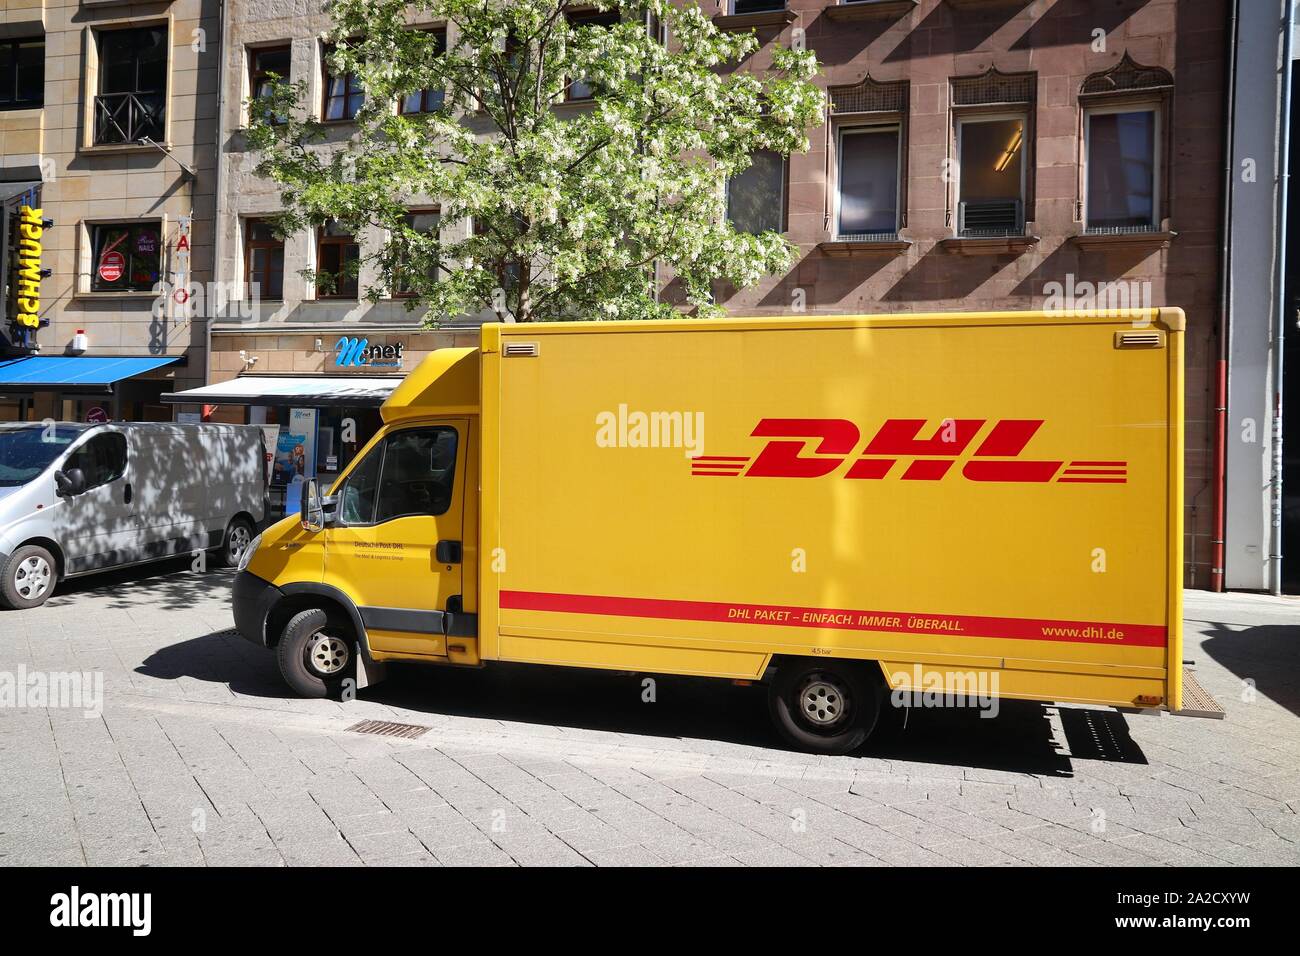 NUREMBERG, GERMANY - MAY 7, 2018: DHL courier delivery van in Germany. DHL  is part of German national mail service - Deutsche Post Stock Photo - Alamy